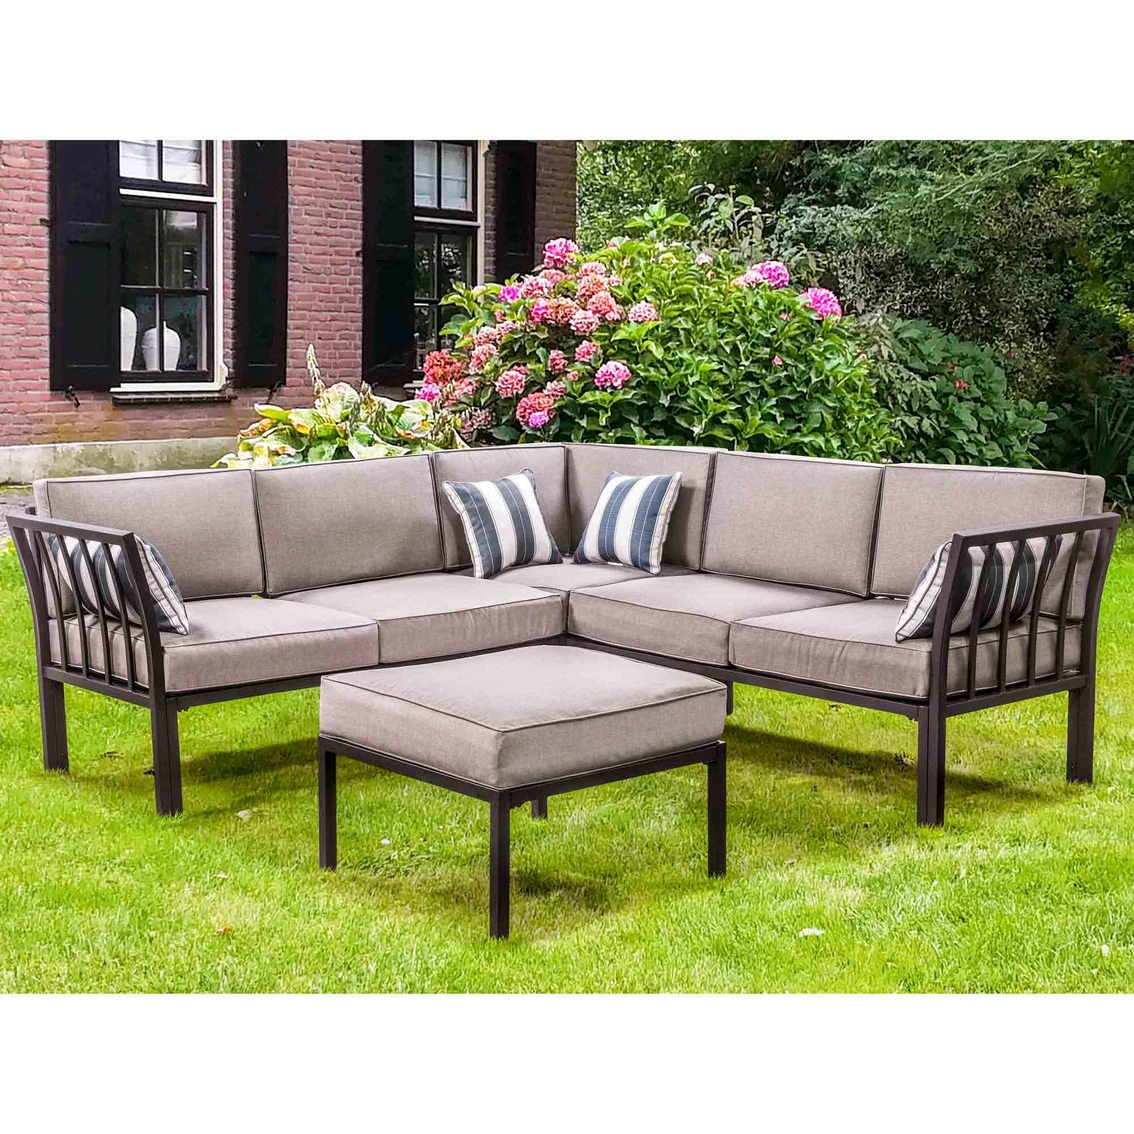 Courtyard Creations Mission Ridge 4 Pc Sectional Sofa Set Patio pertaining to size 1134 X 1134